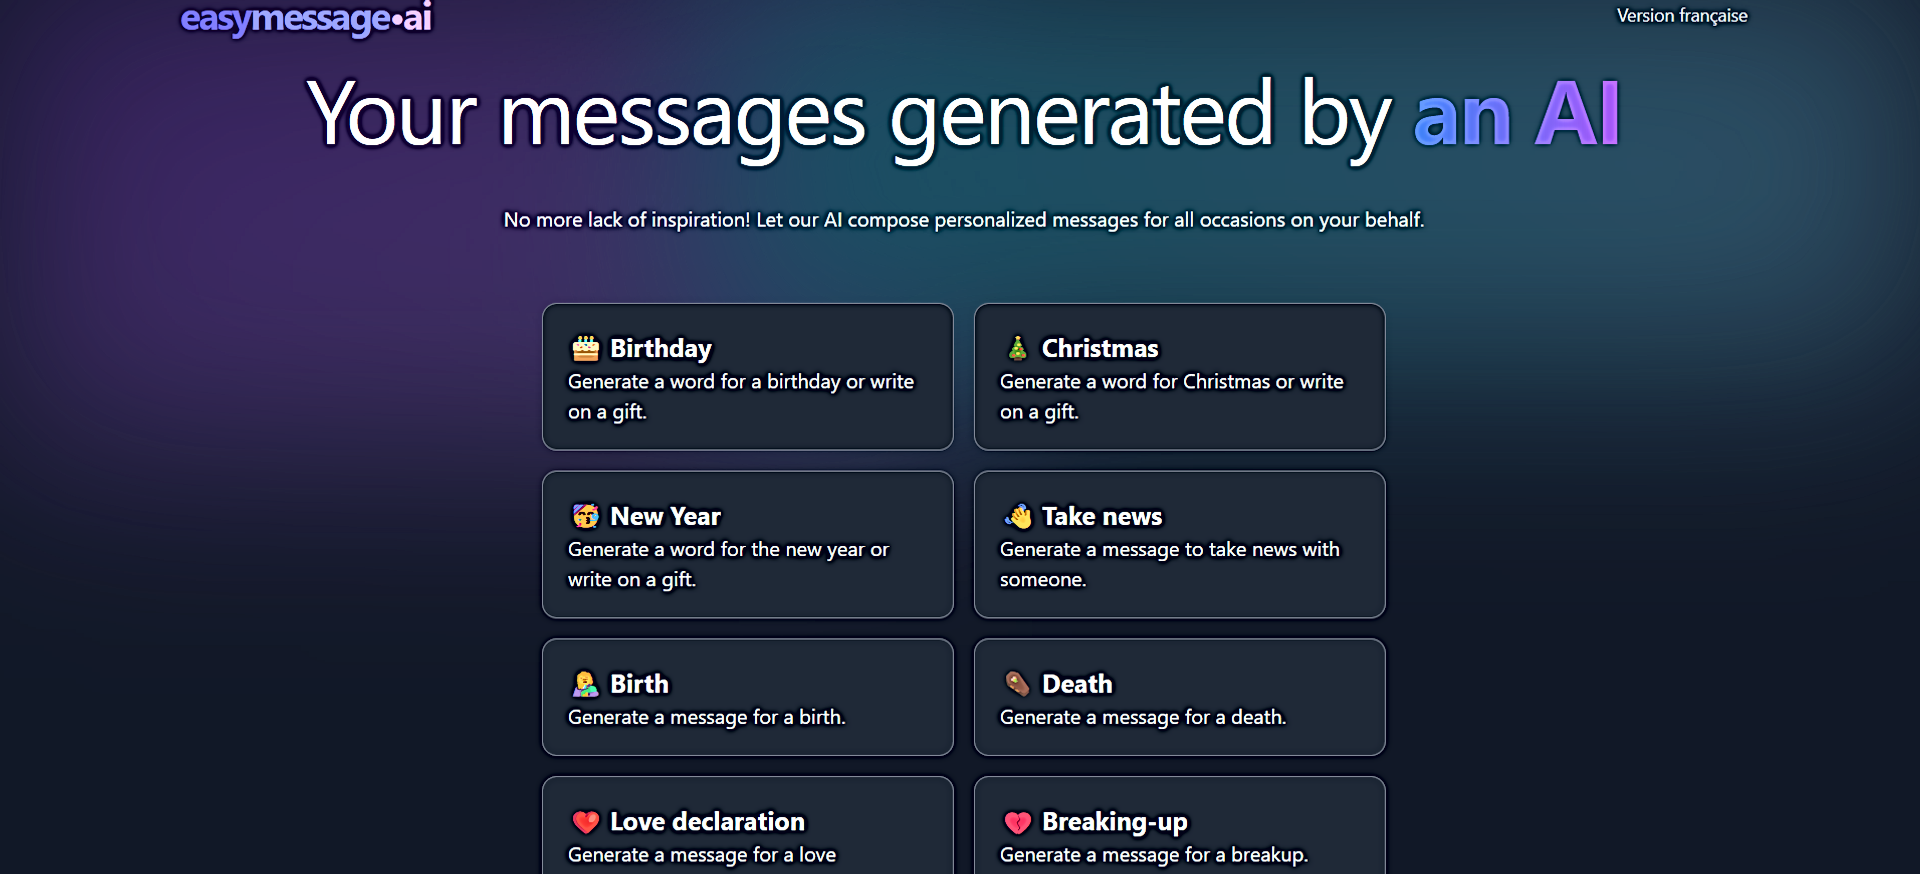 EasyMessage featured